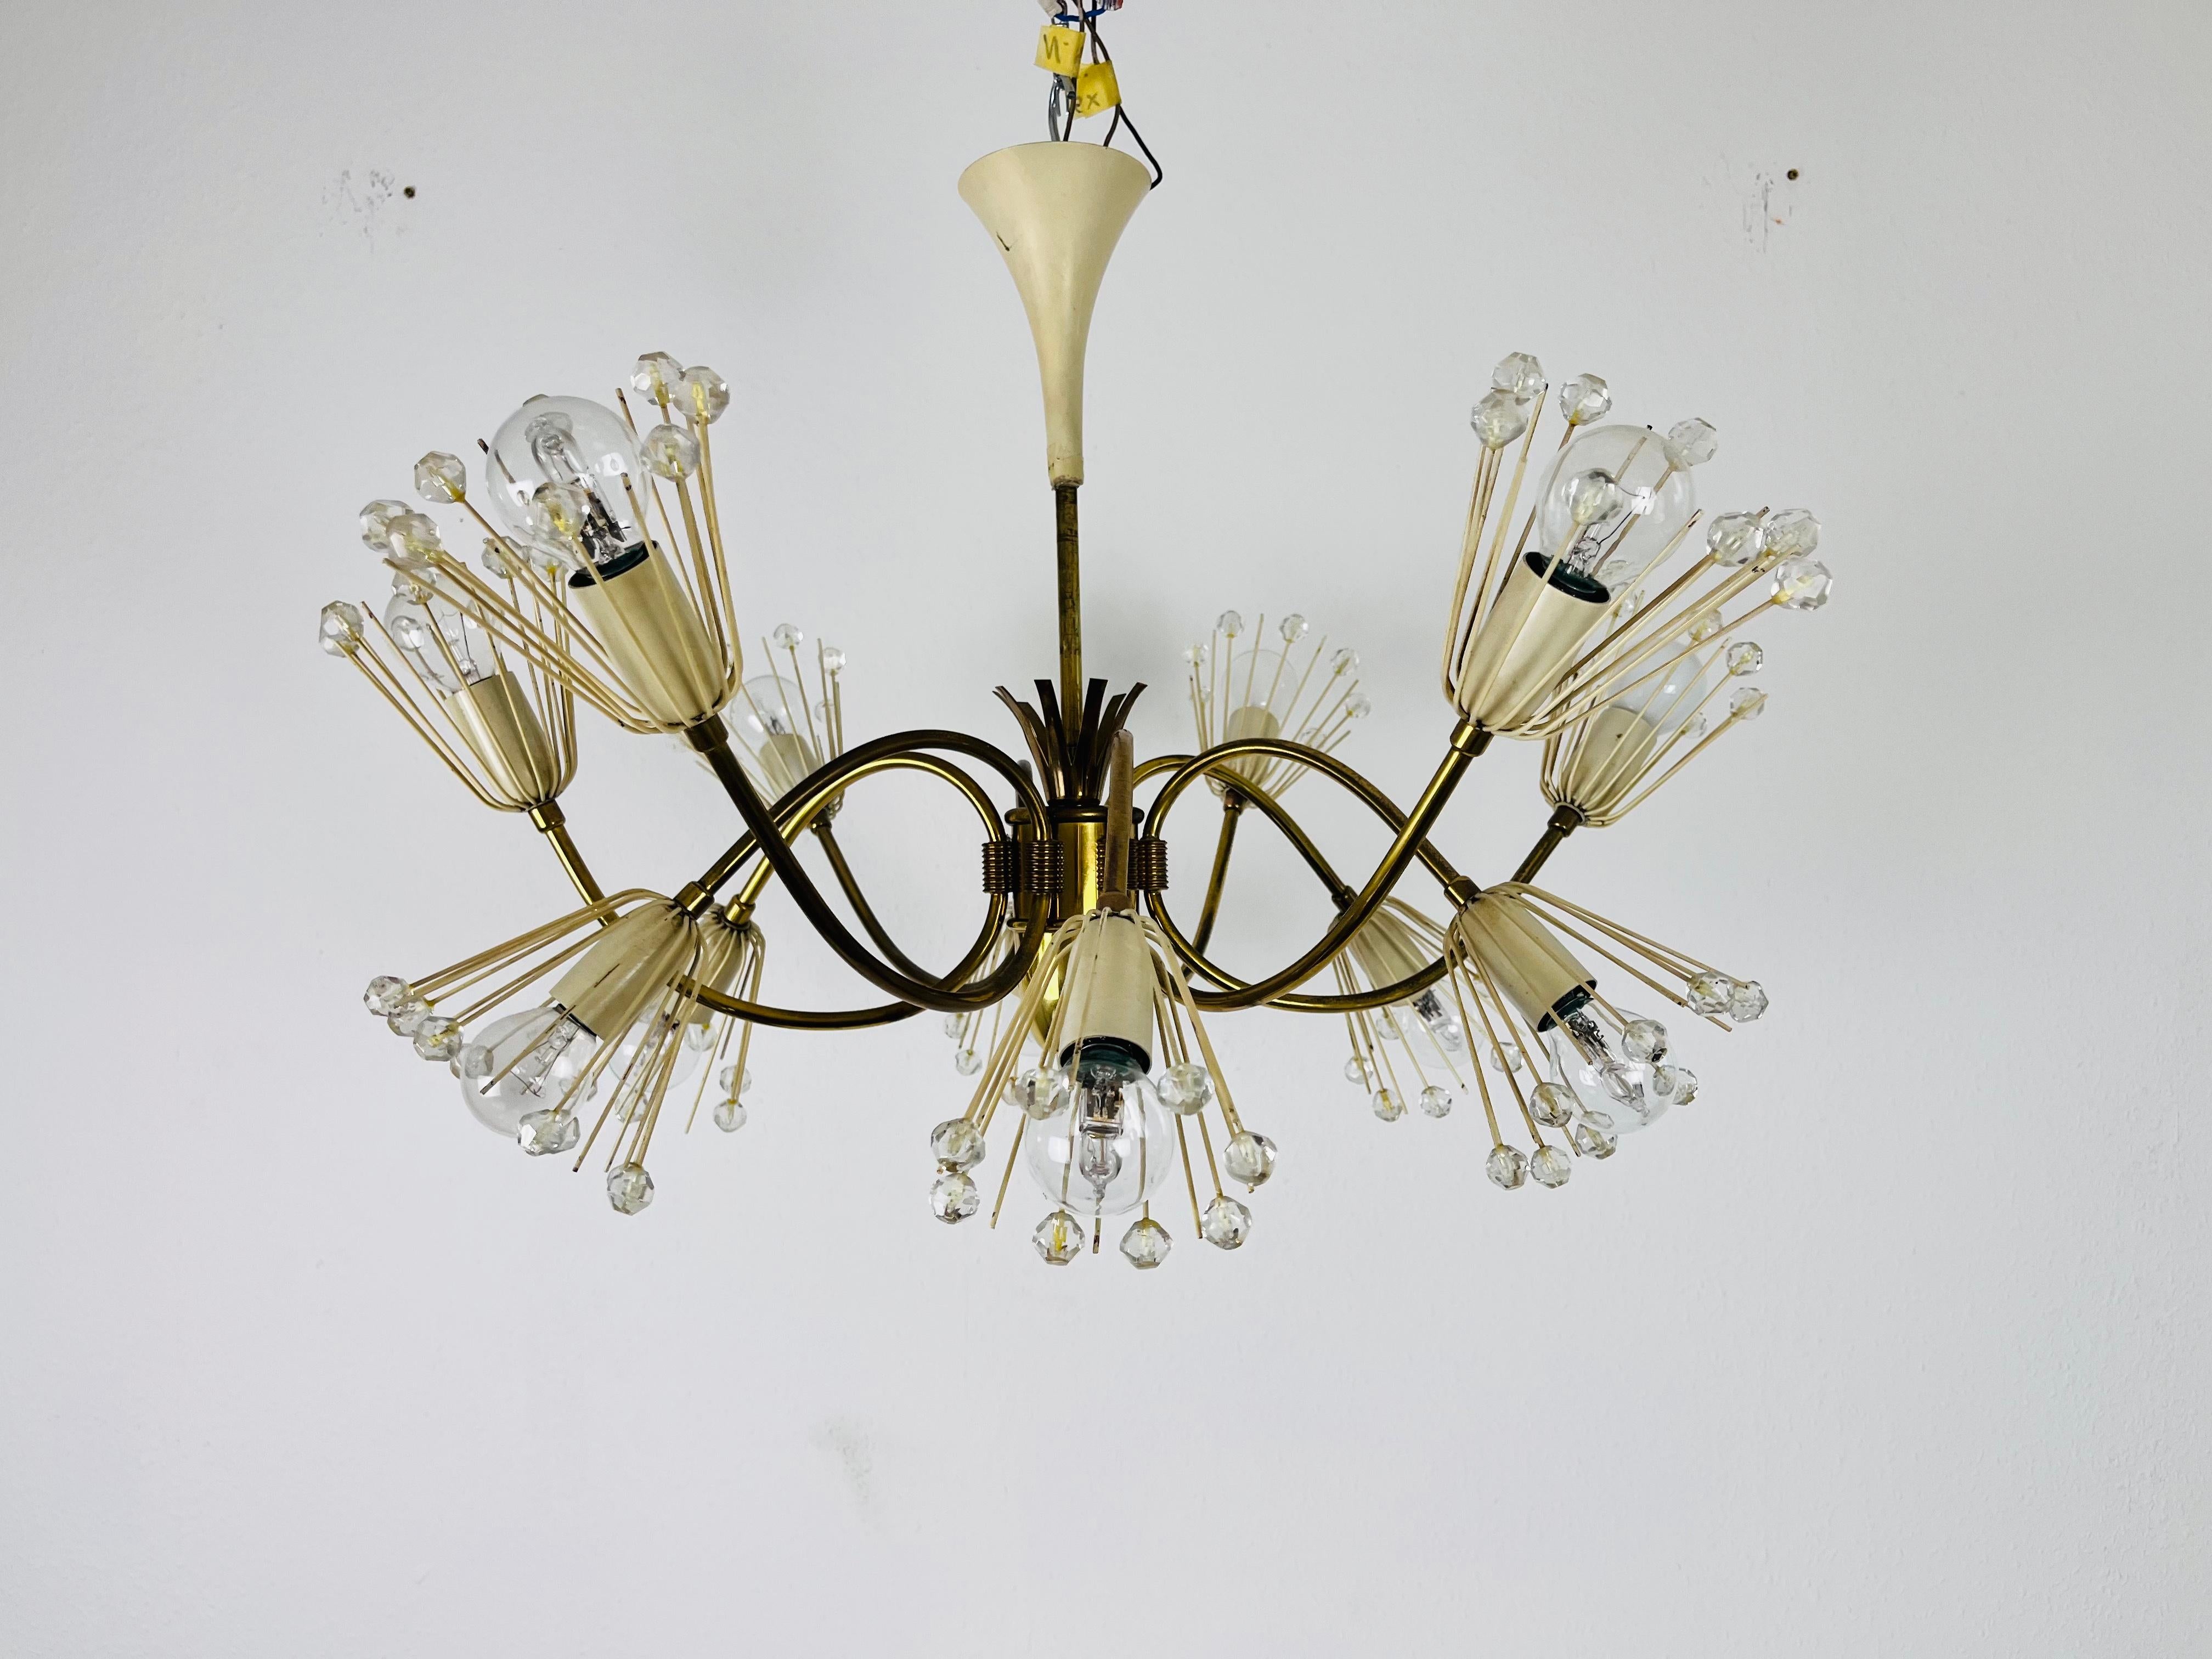 Glass and Brass Chandelier by Emil Stejnar for Rupert Nikoll, 1960s For Sale 4